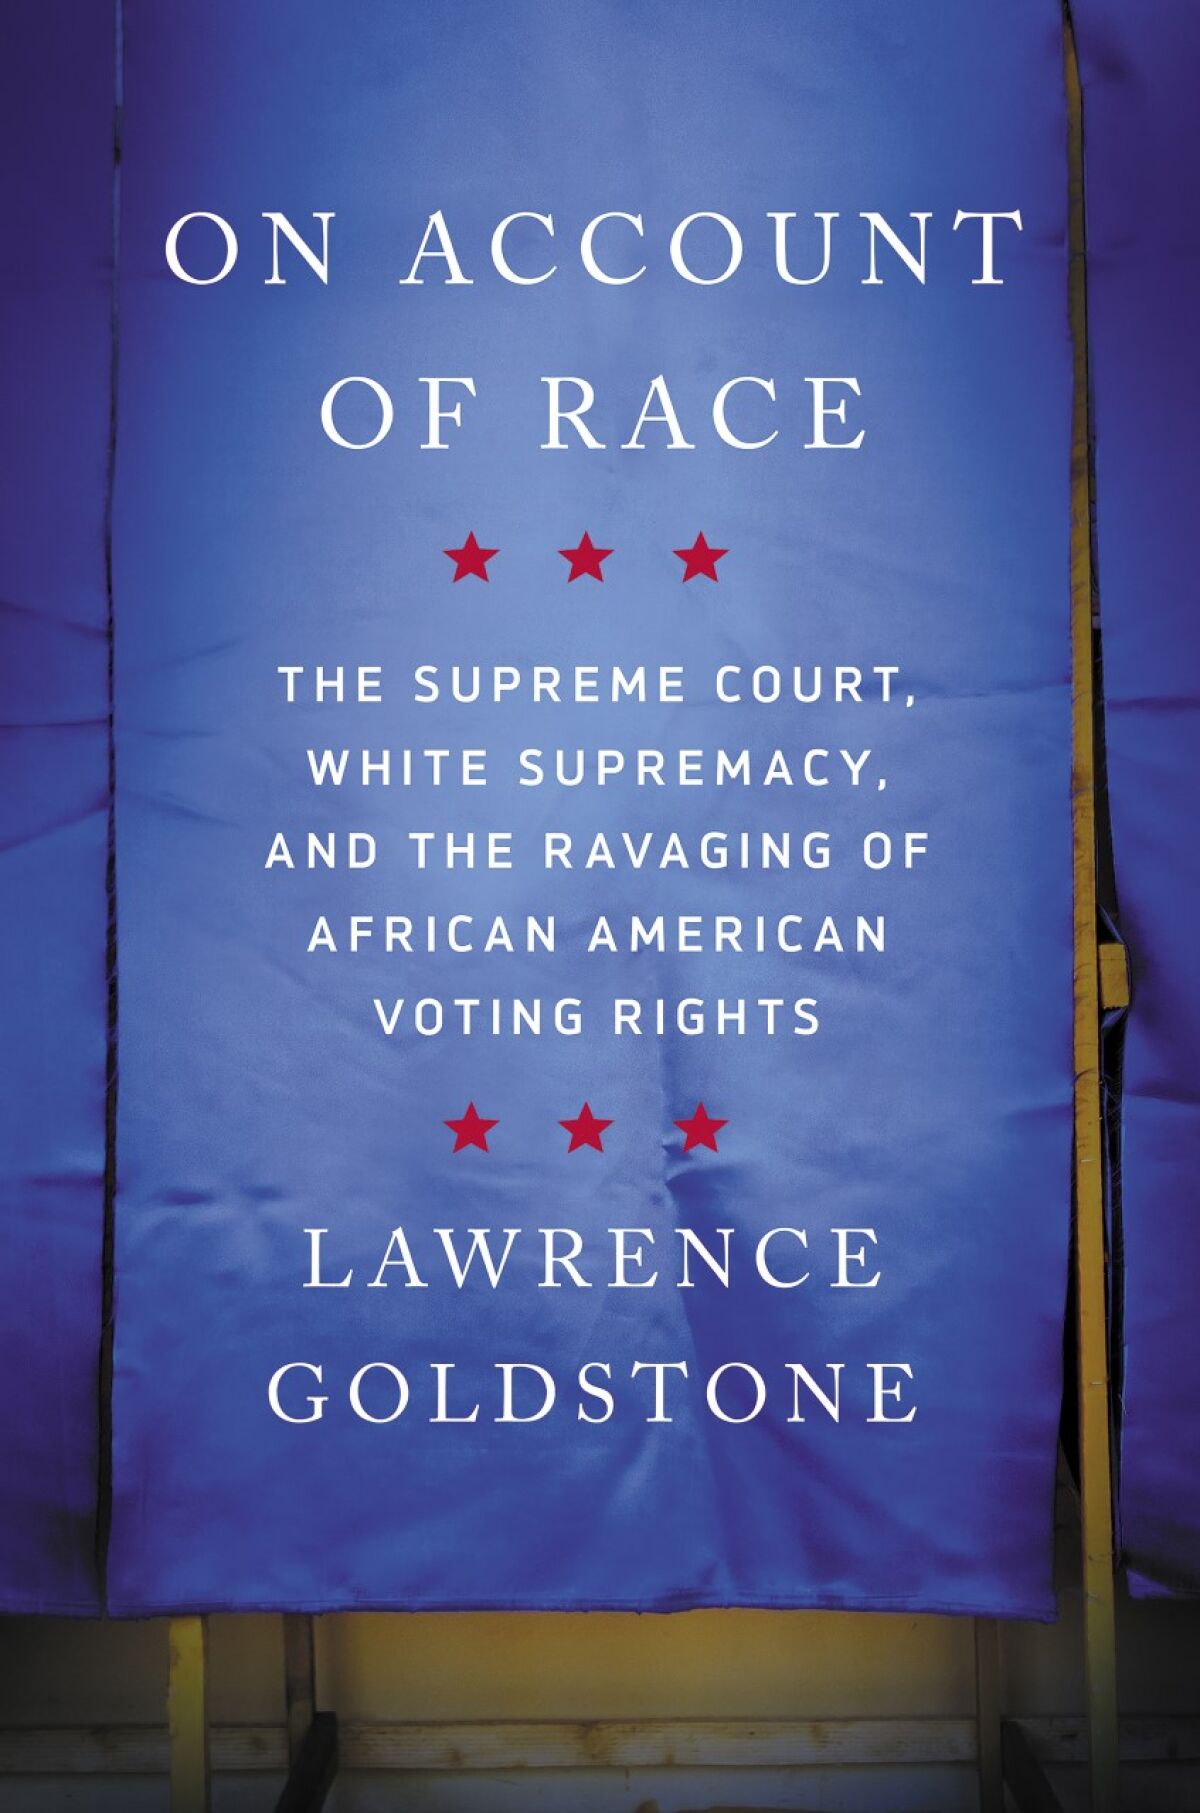 The cover of “On Account of Race” by Lawrence Goldstone